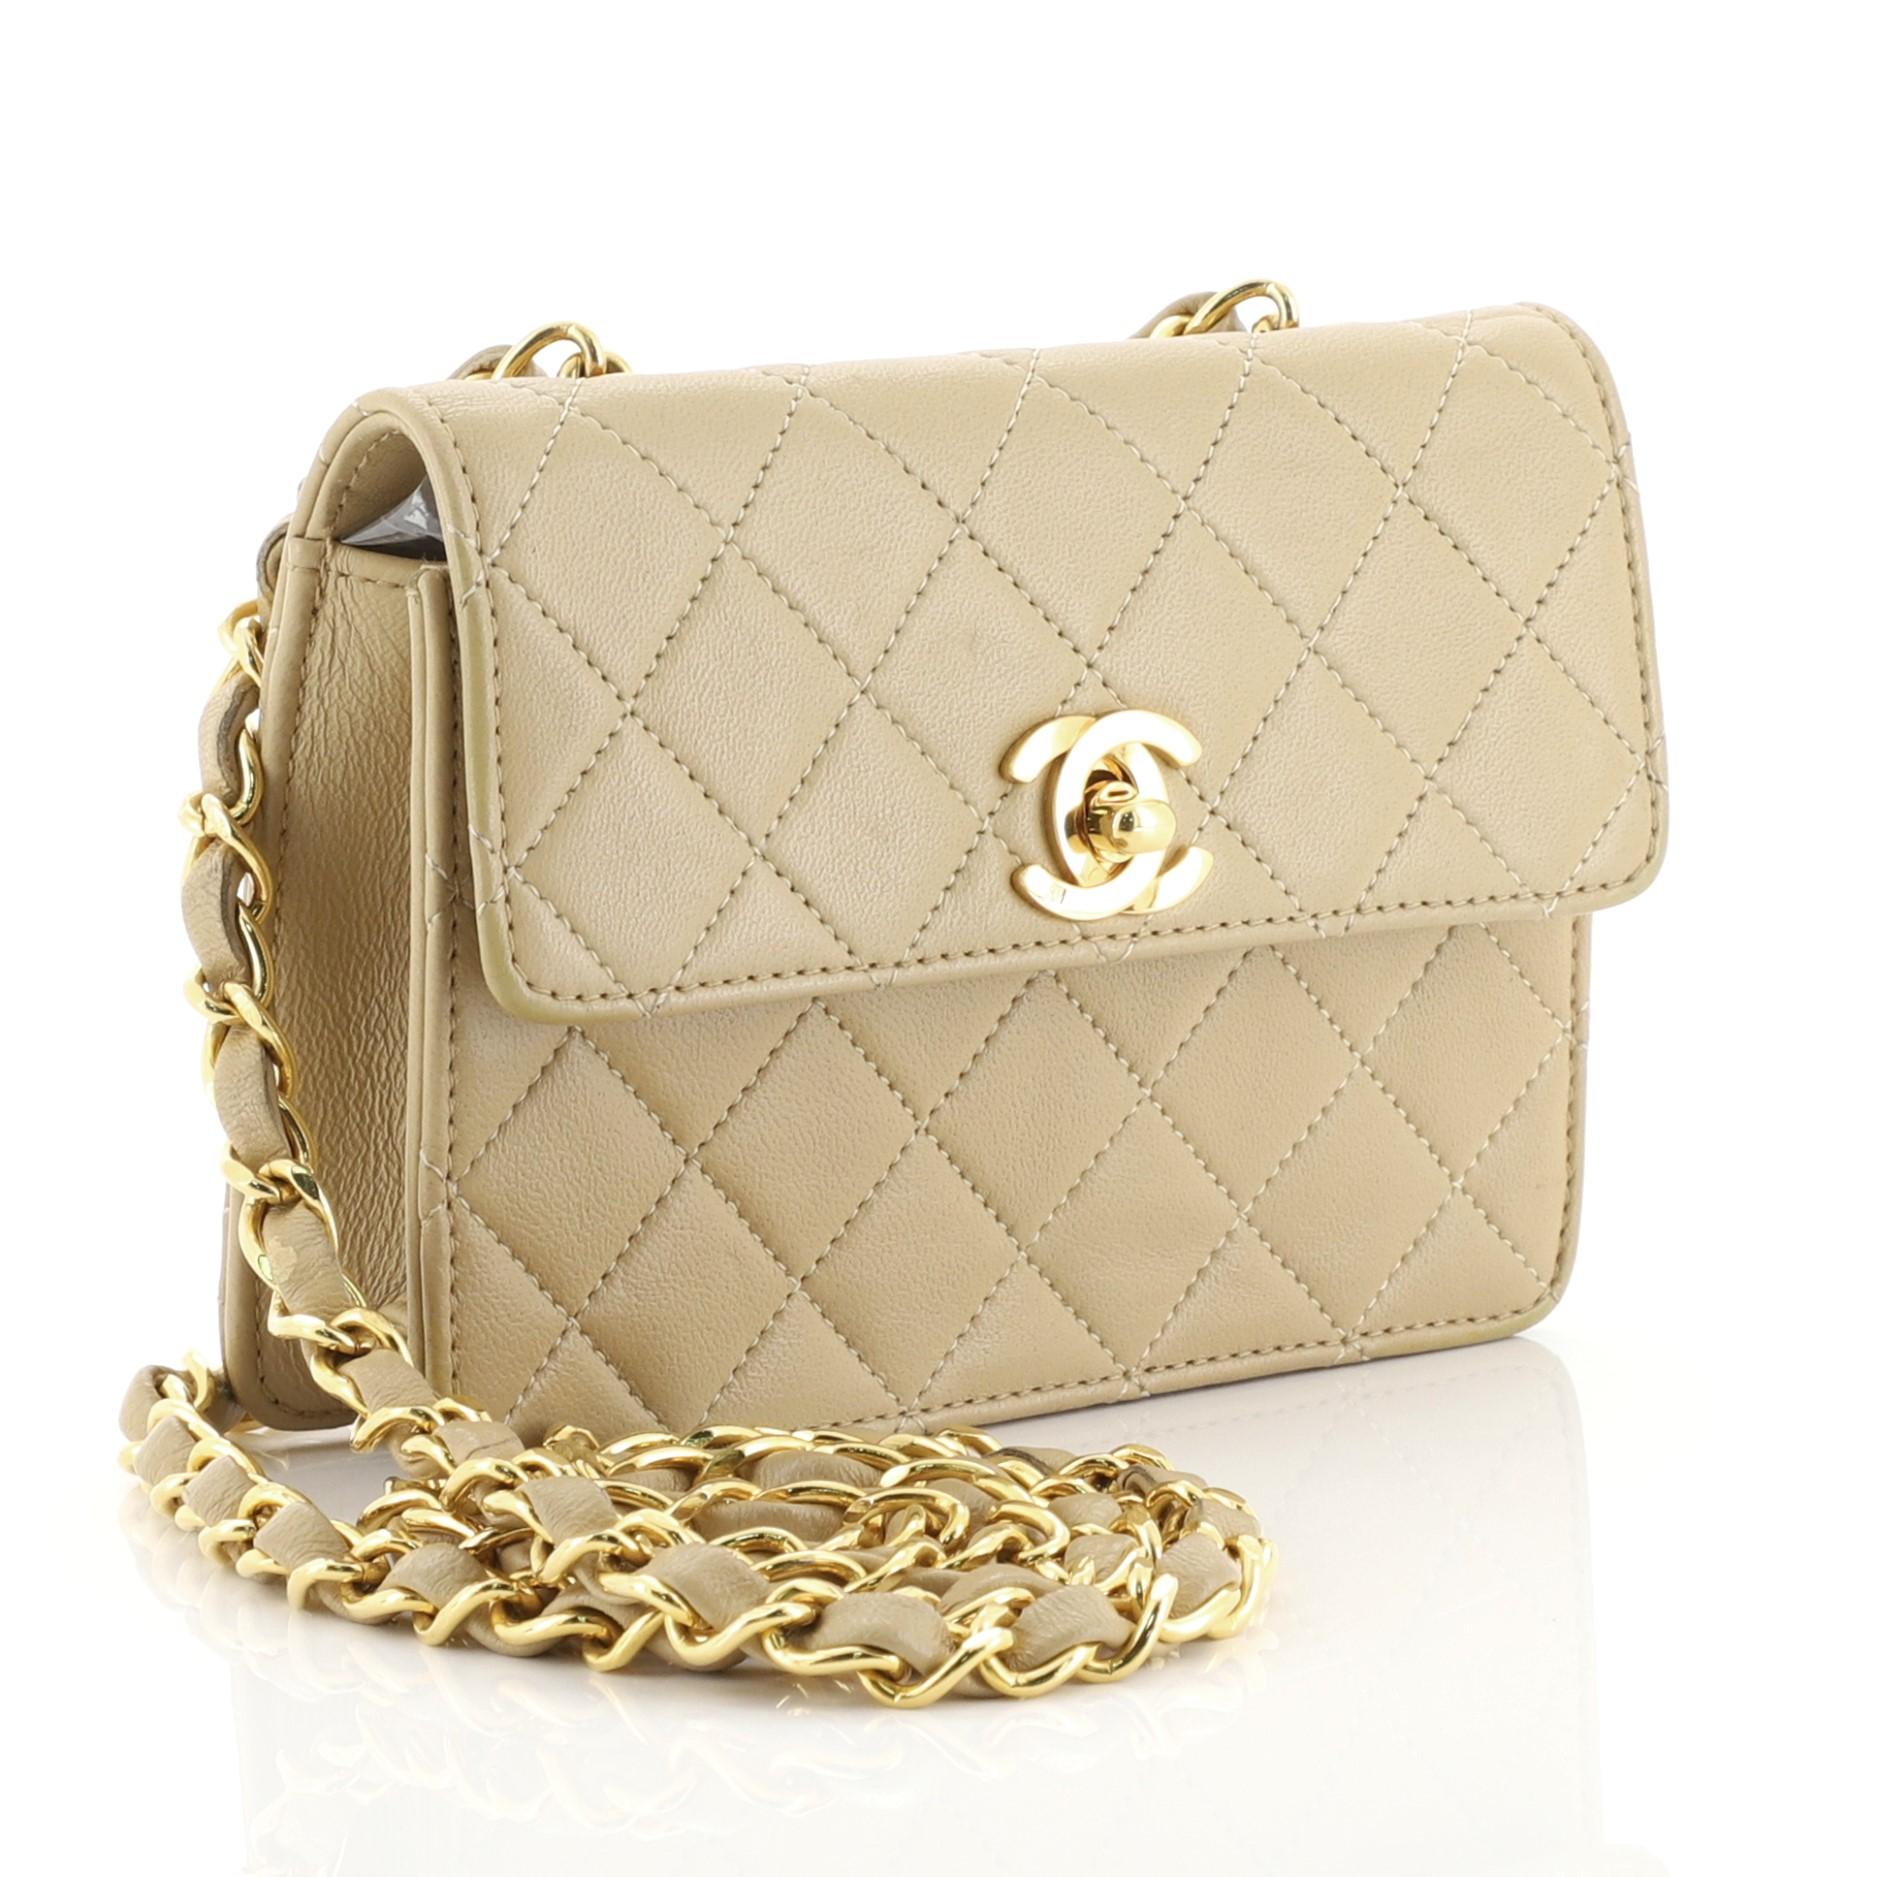 This Chanel Vintage CC Chain Flap Bag Quilted Leather Extra Mini, crafted from neutral quilted leather, features woven-in leather chain link strap and gold-tone hardware. Its CC turn-lock closure opens to a neutral leather interior. Hologram sticker